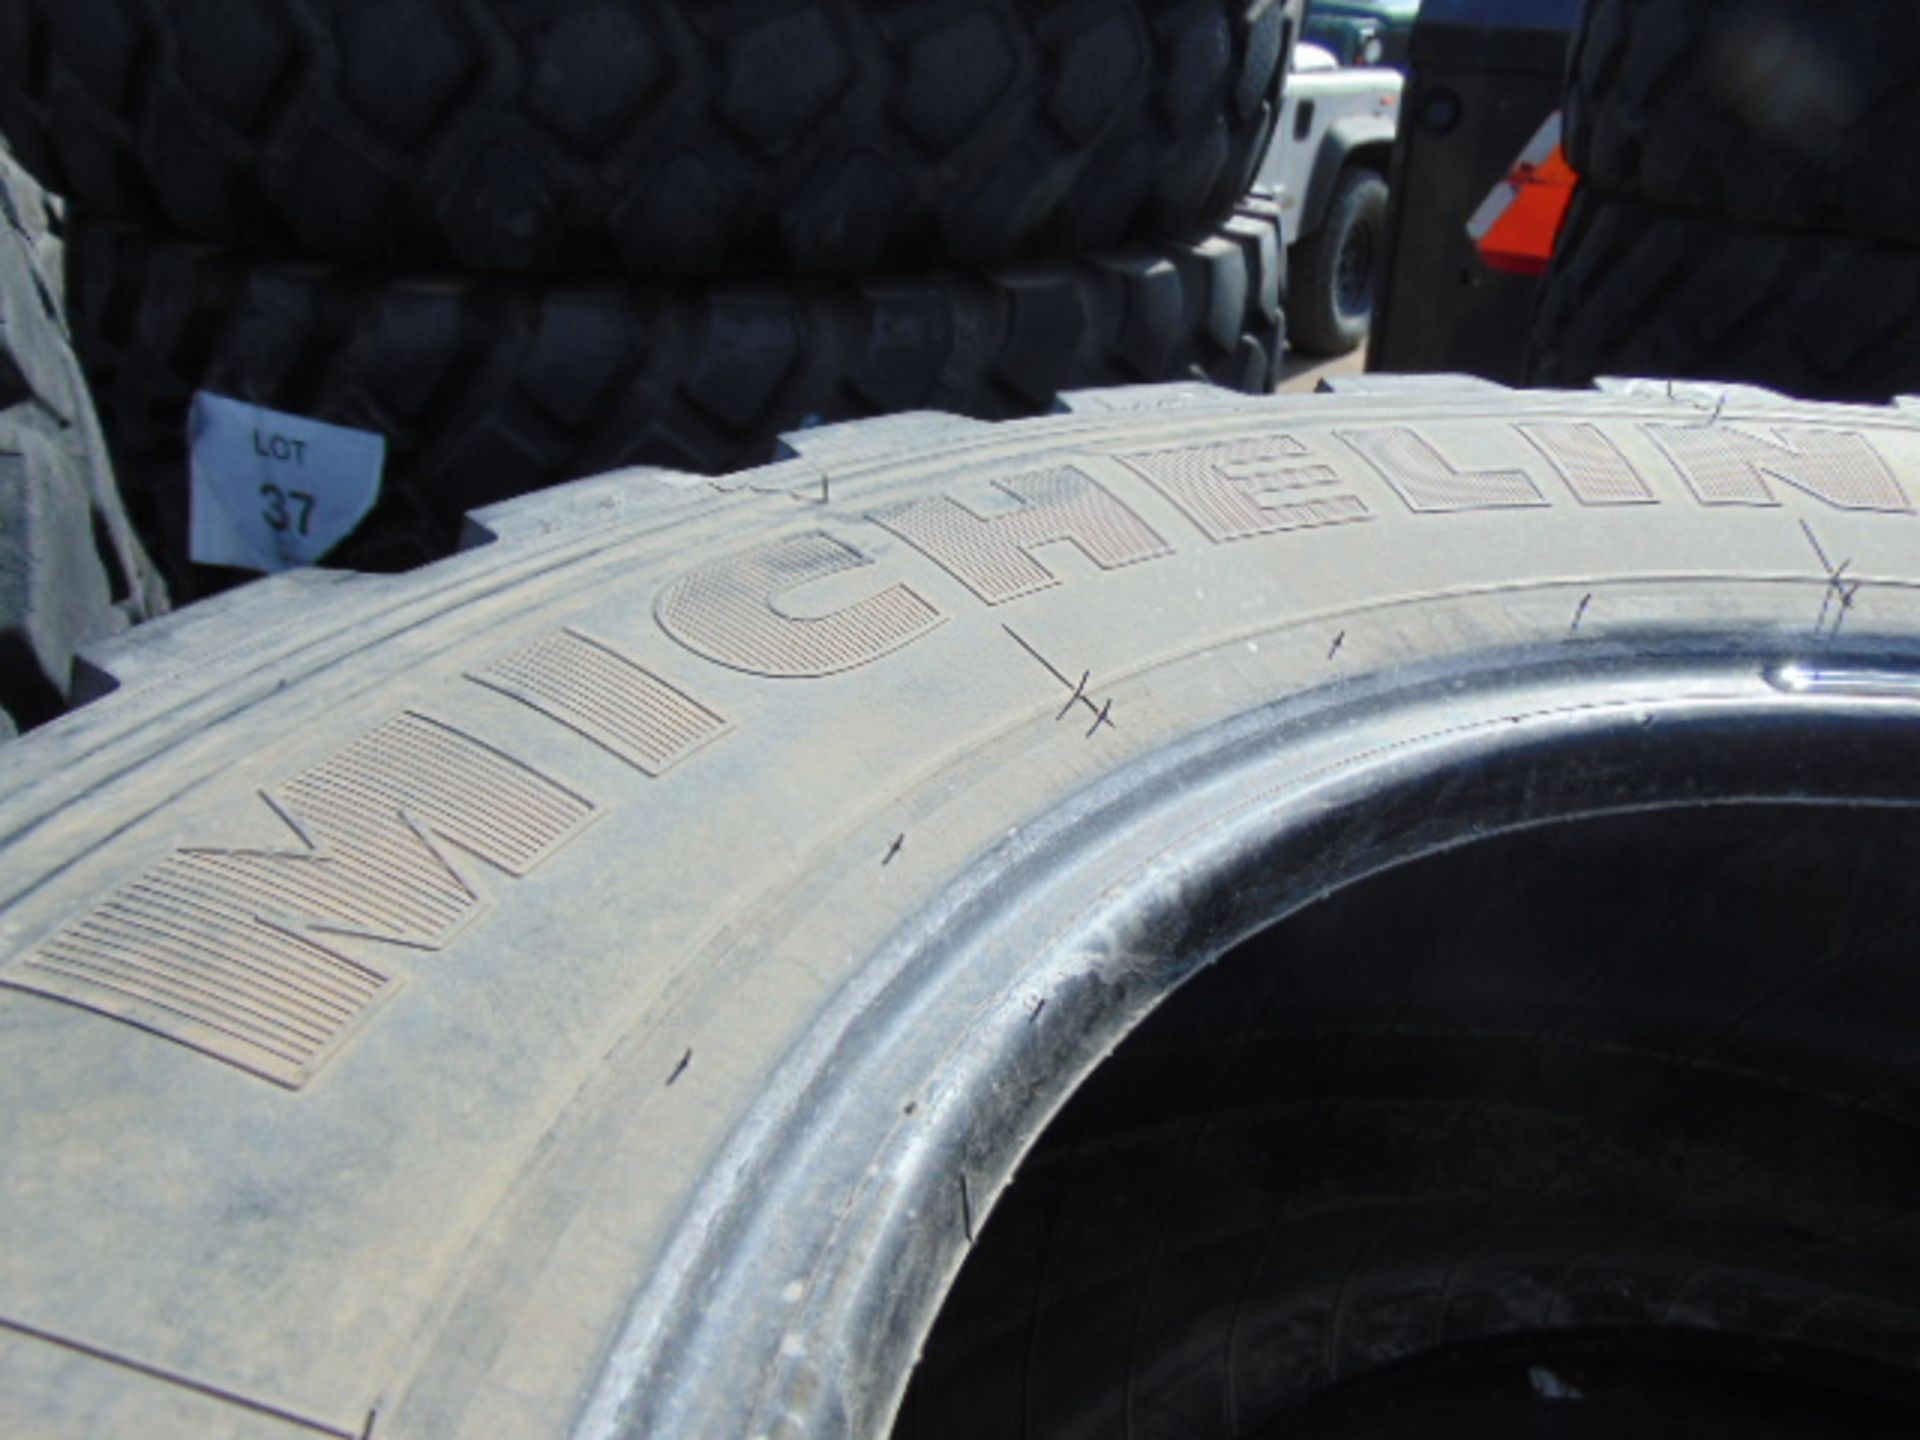 4 x Michelin XZL 335/80 R20 Tyres - Image 4 of 5